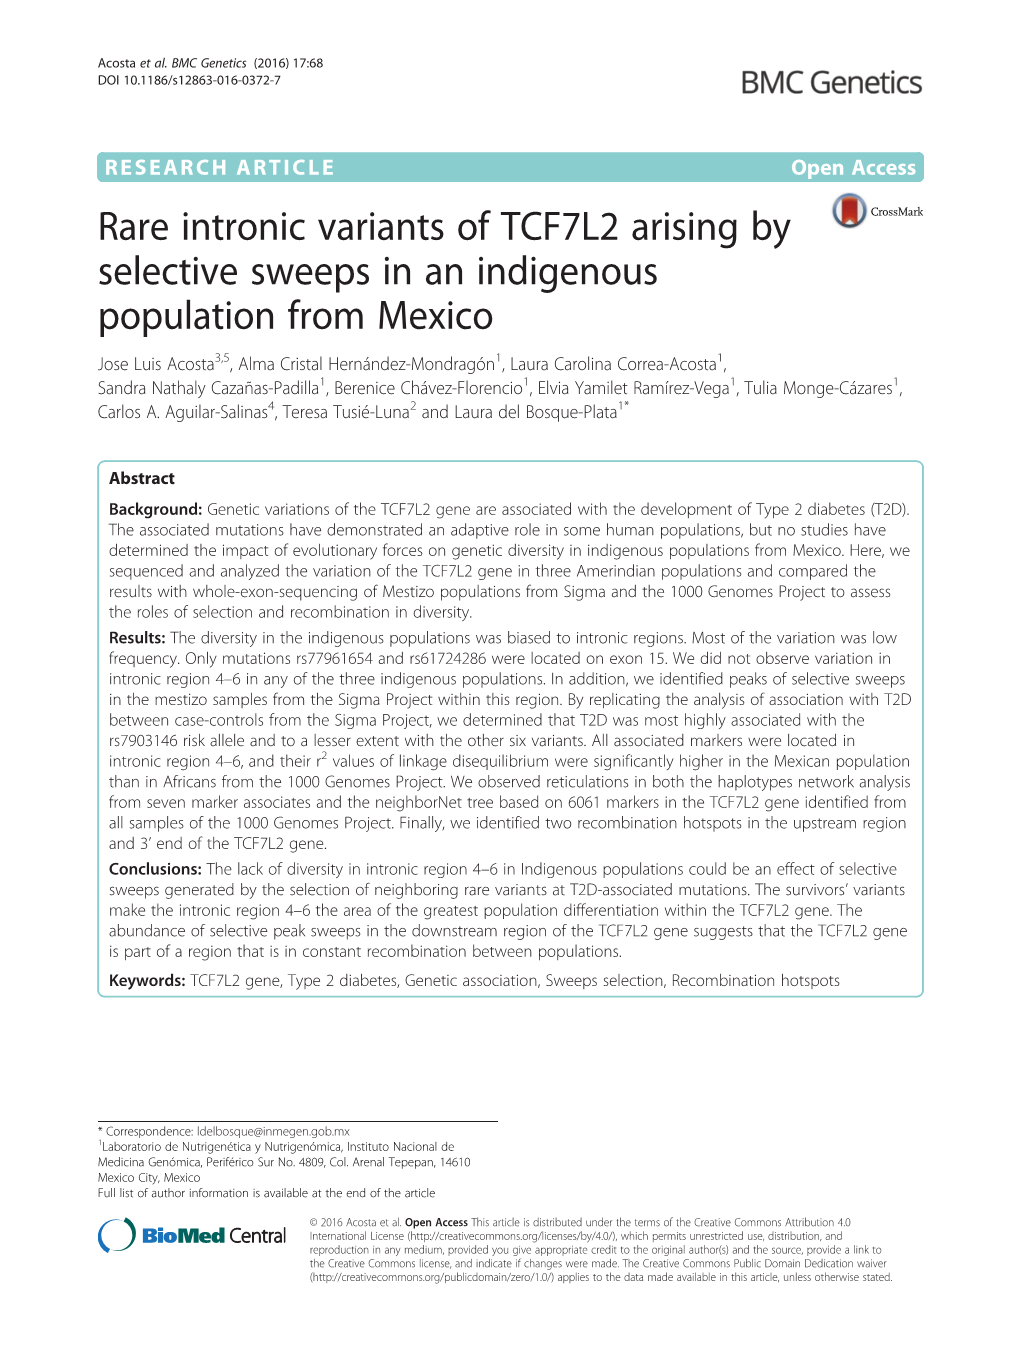 Rare Intronic Variants of TCF7L2 Arising by Selective Sweeps in An